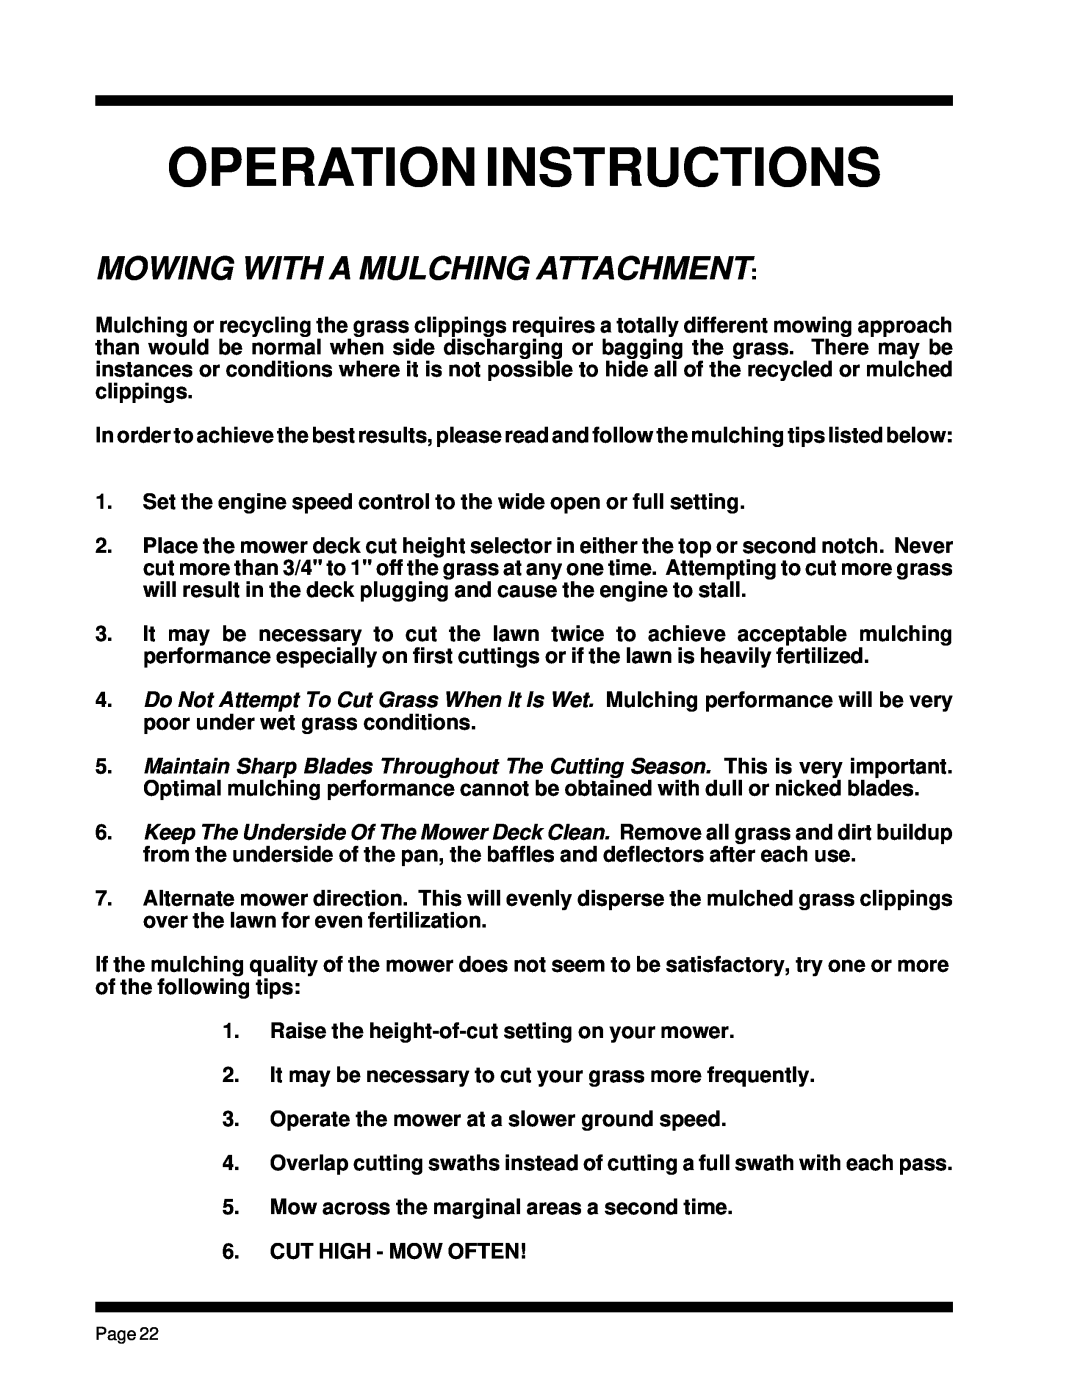 Dixon ZTR 5023, ZTR 5425 manual Mowing With A Mulching Attachment, Operation Instructions 